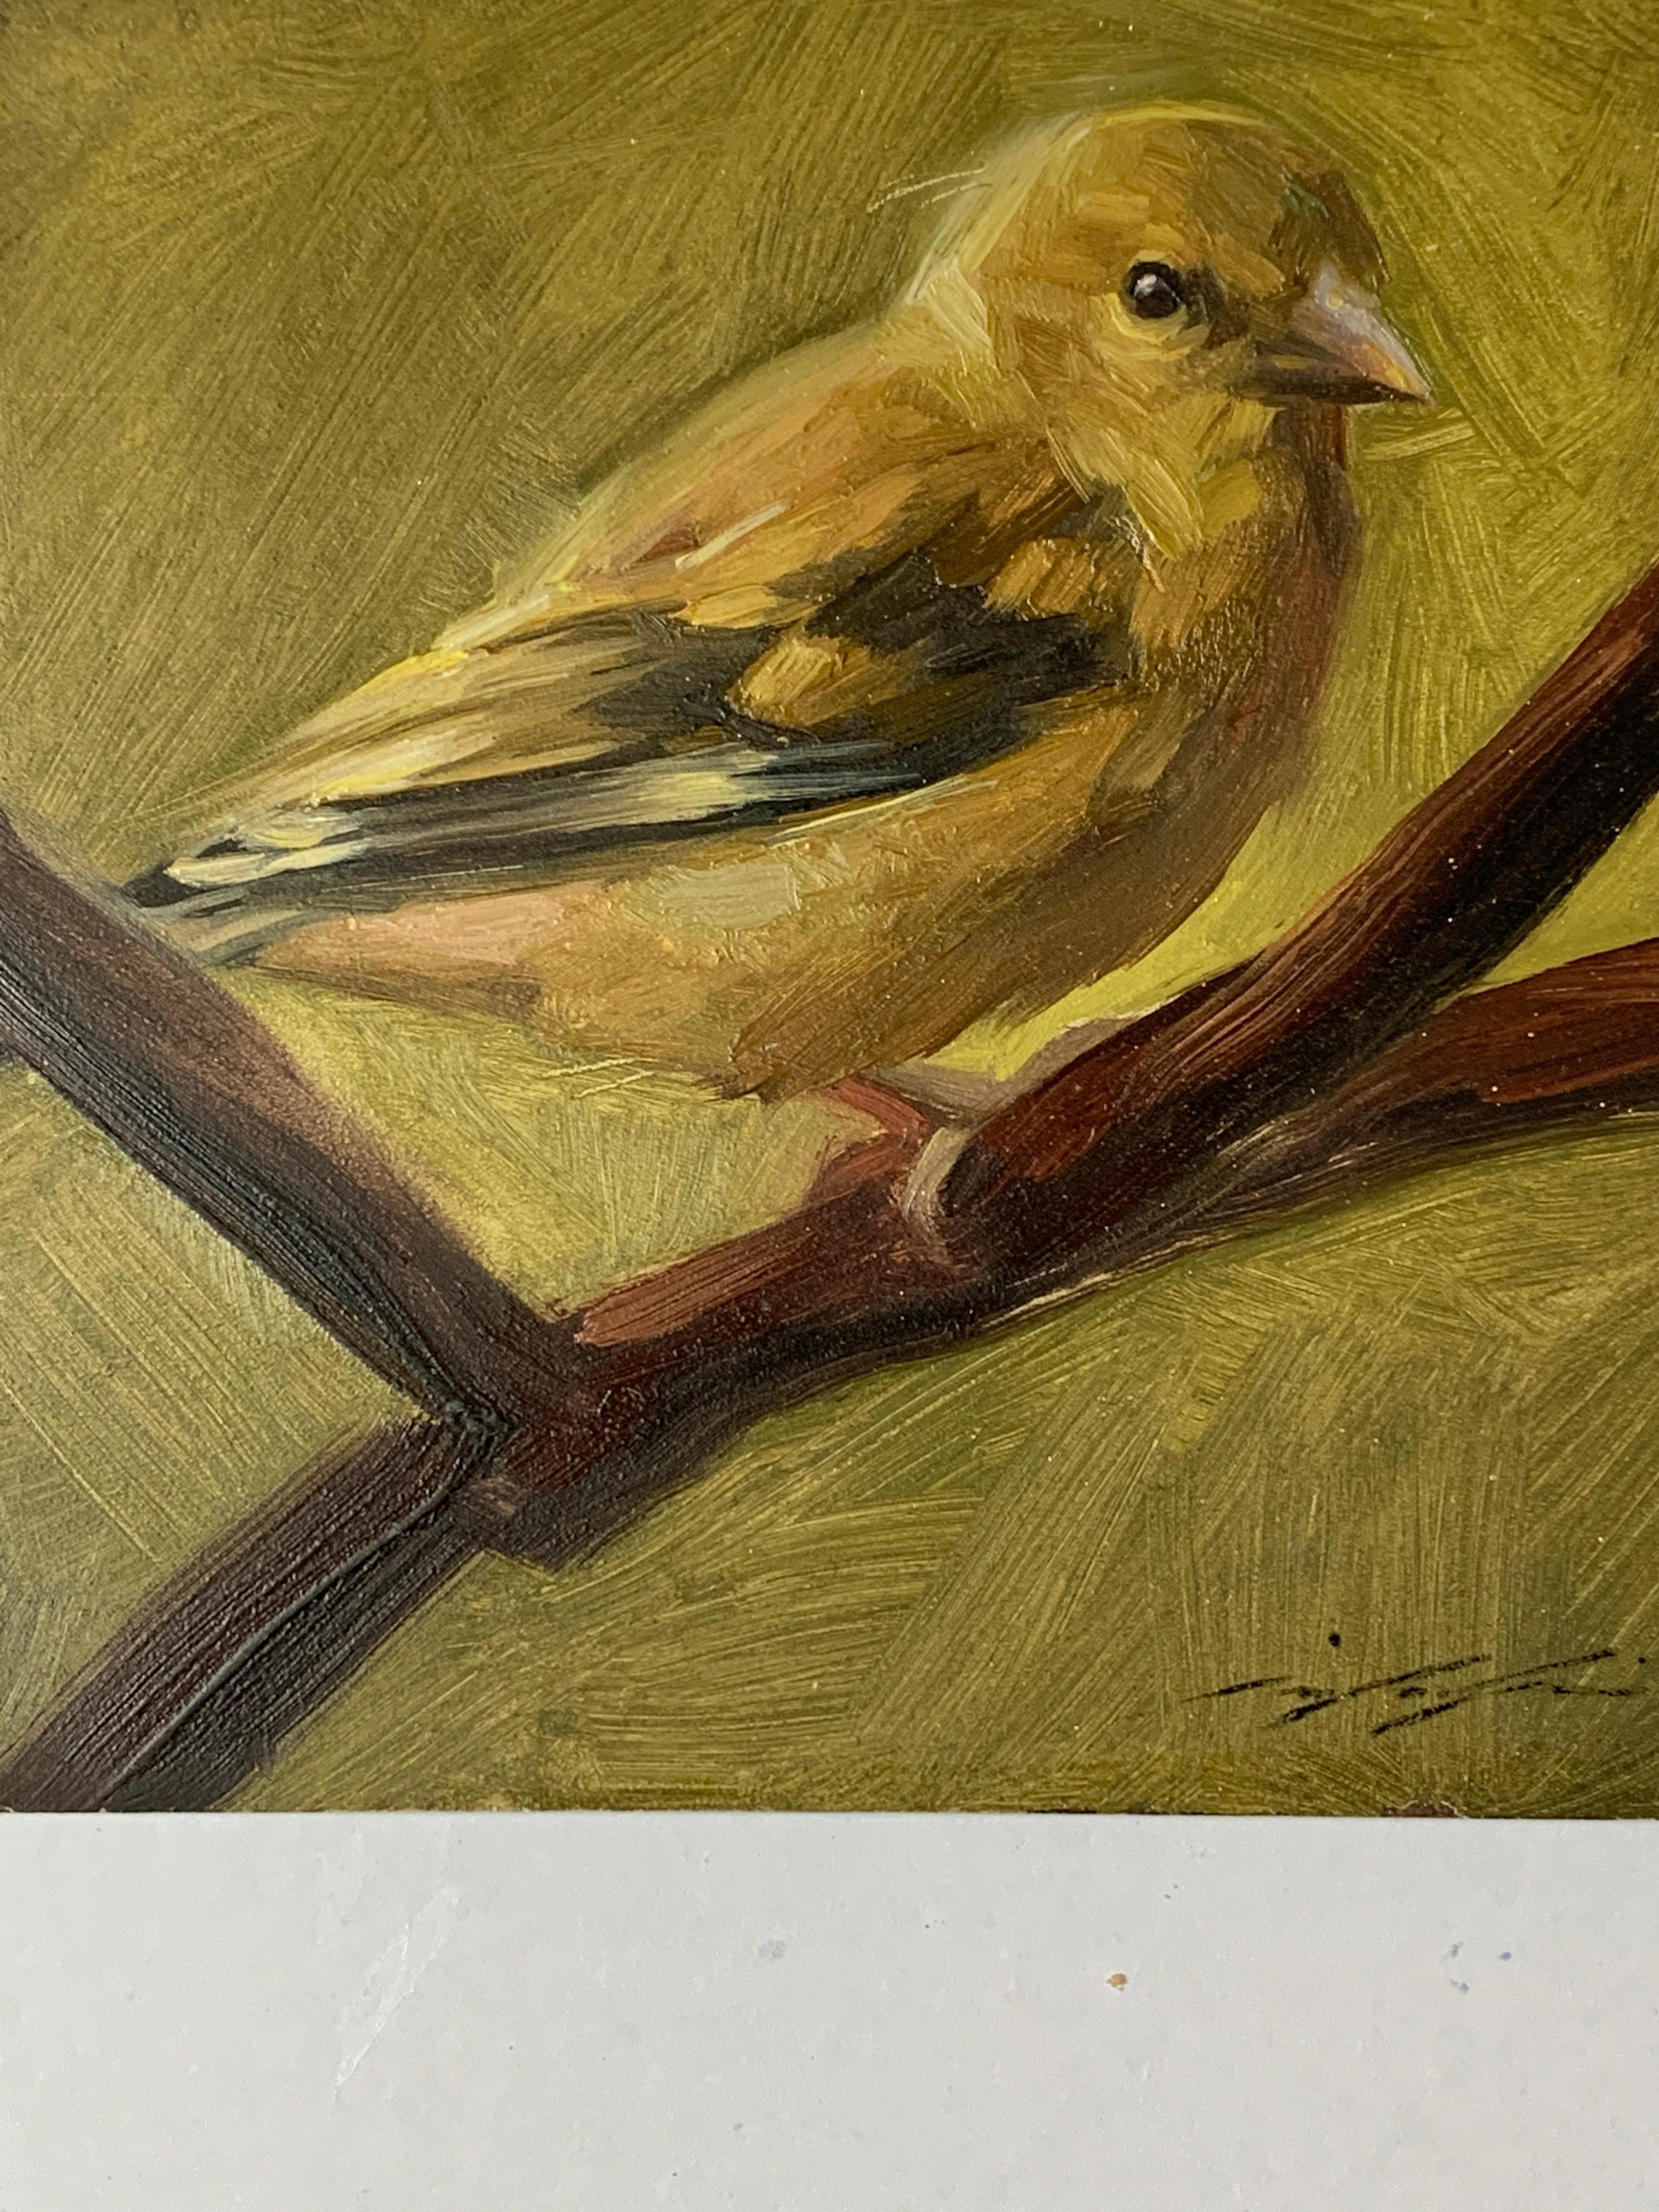 Portrait of a Yellow finch Bird. With wonderful feathering and character  - Painting by Jennifer Gennari